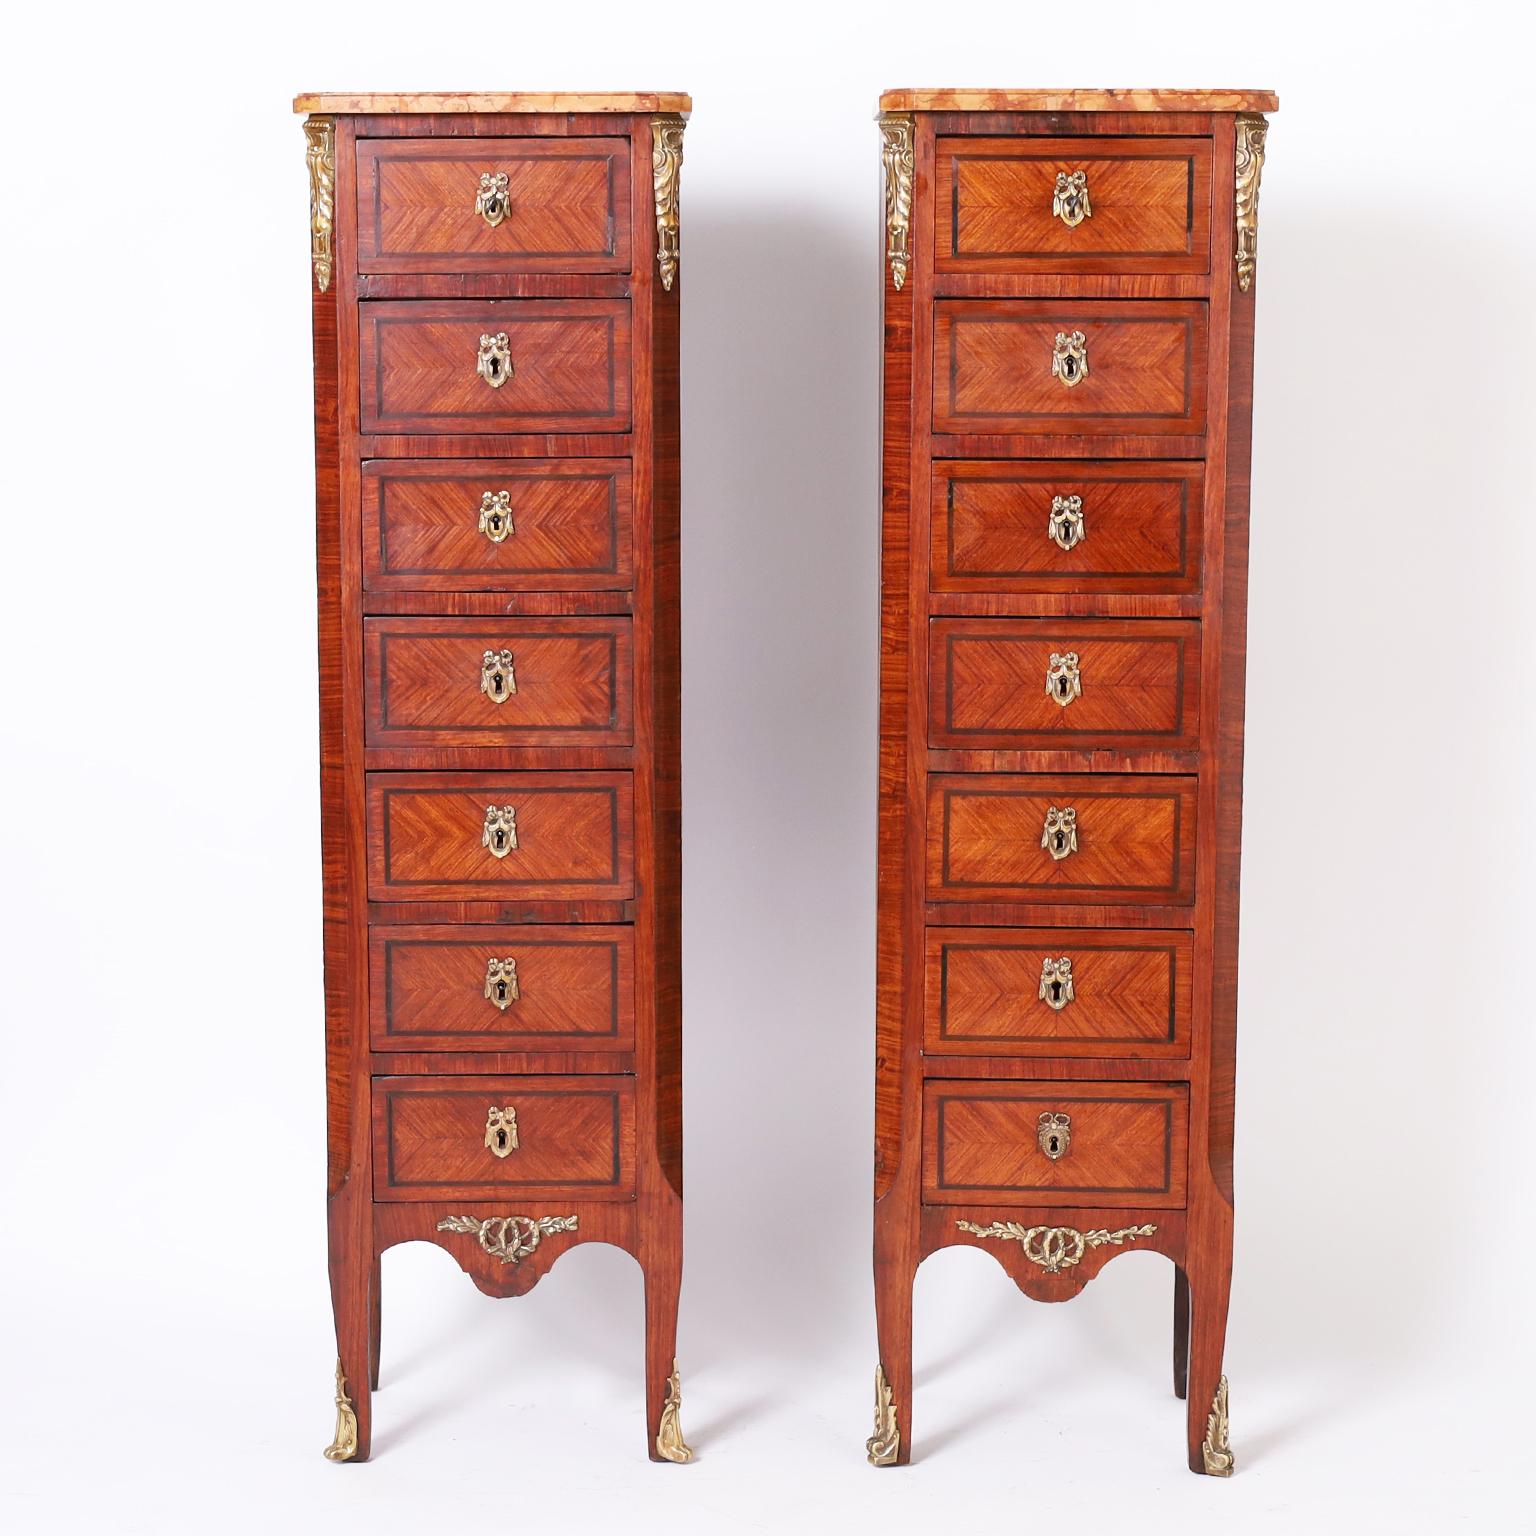 Refined pair of 19th century French lingerie chests with marble tops on seven drawer cases crafted in tulipwood and walnut decorated with gilt bronze ormolu, drapery escutcheons, and floral wreaths.